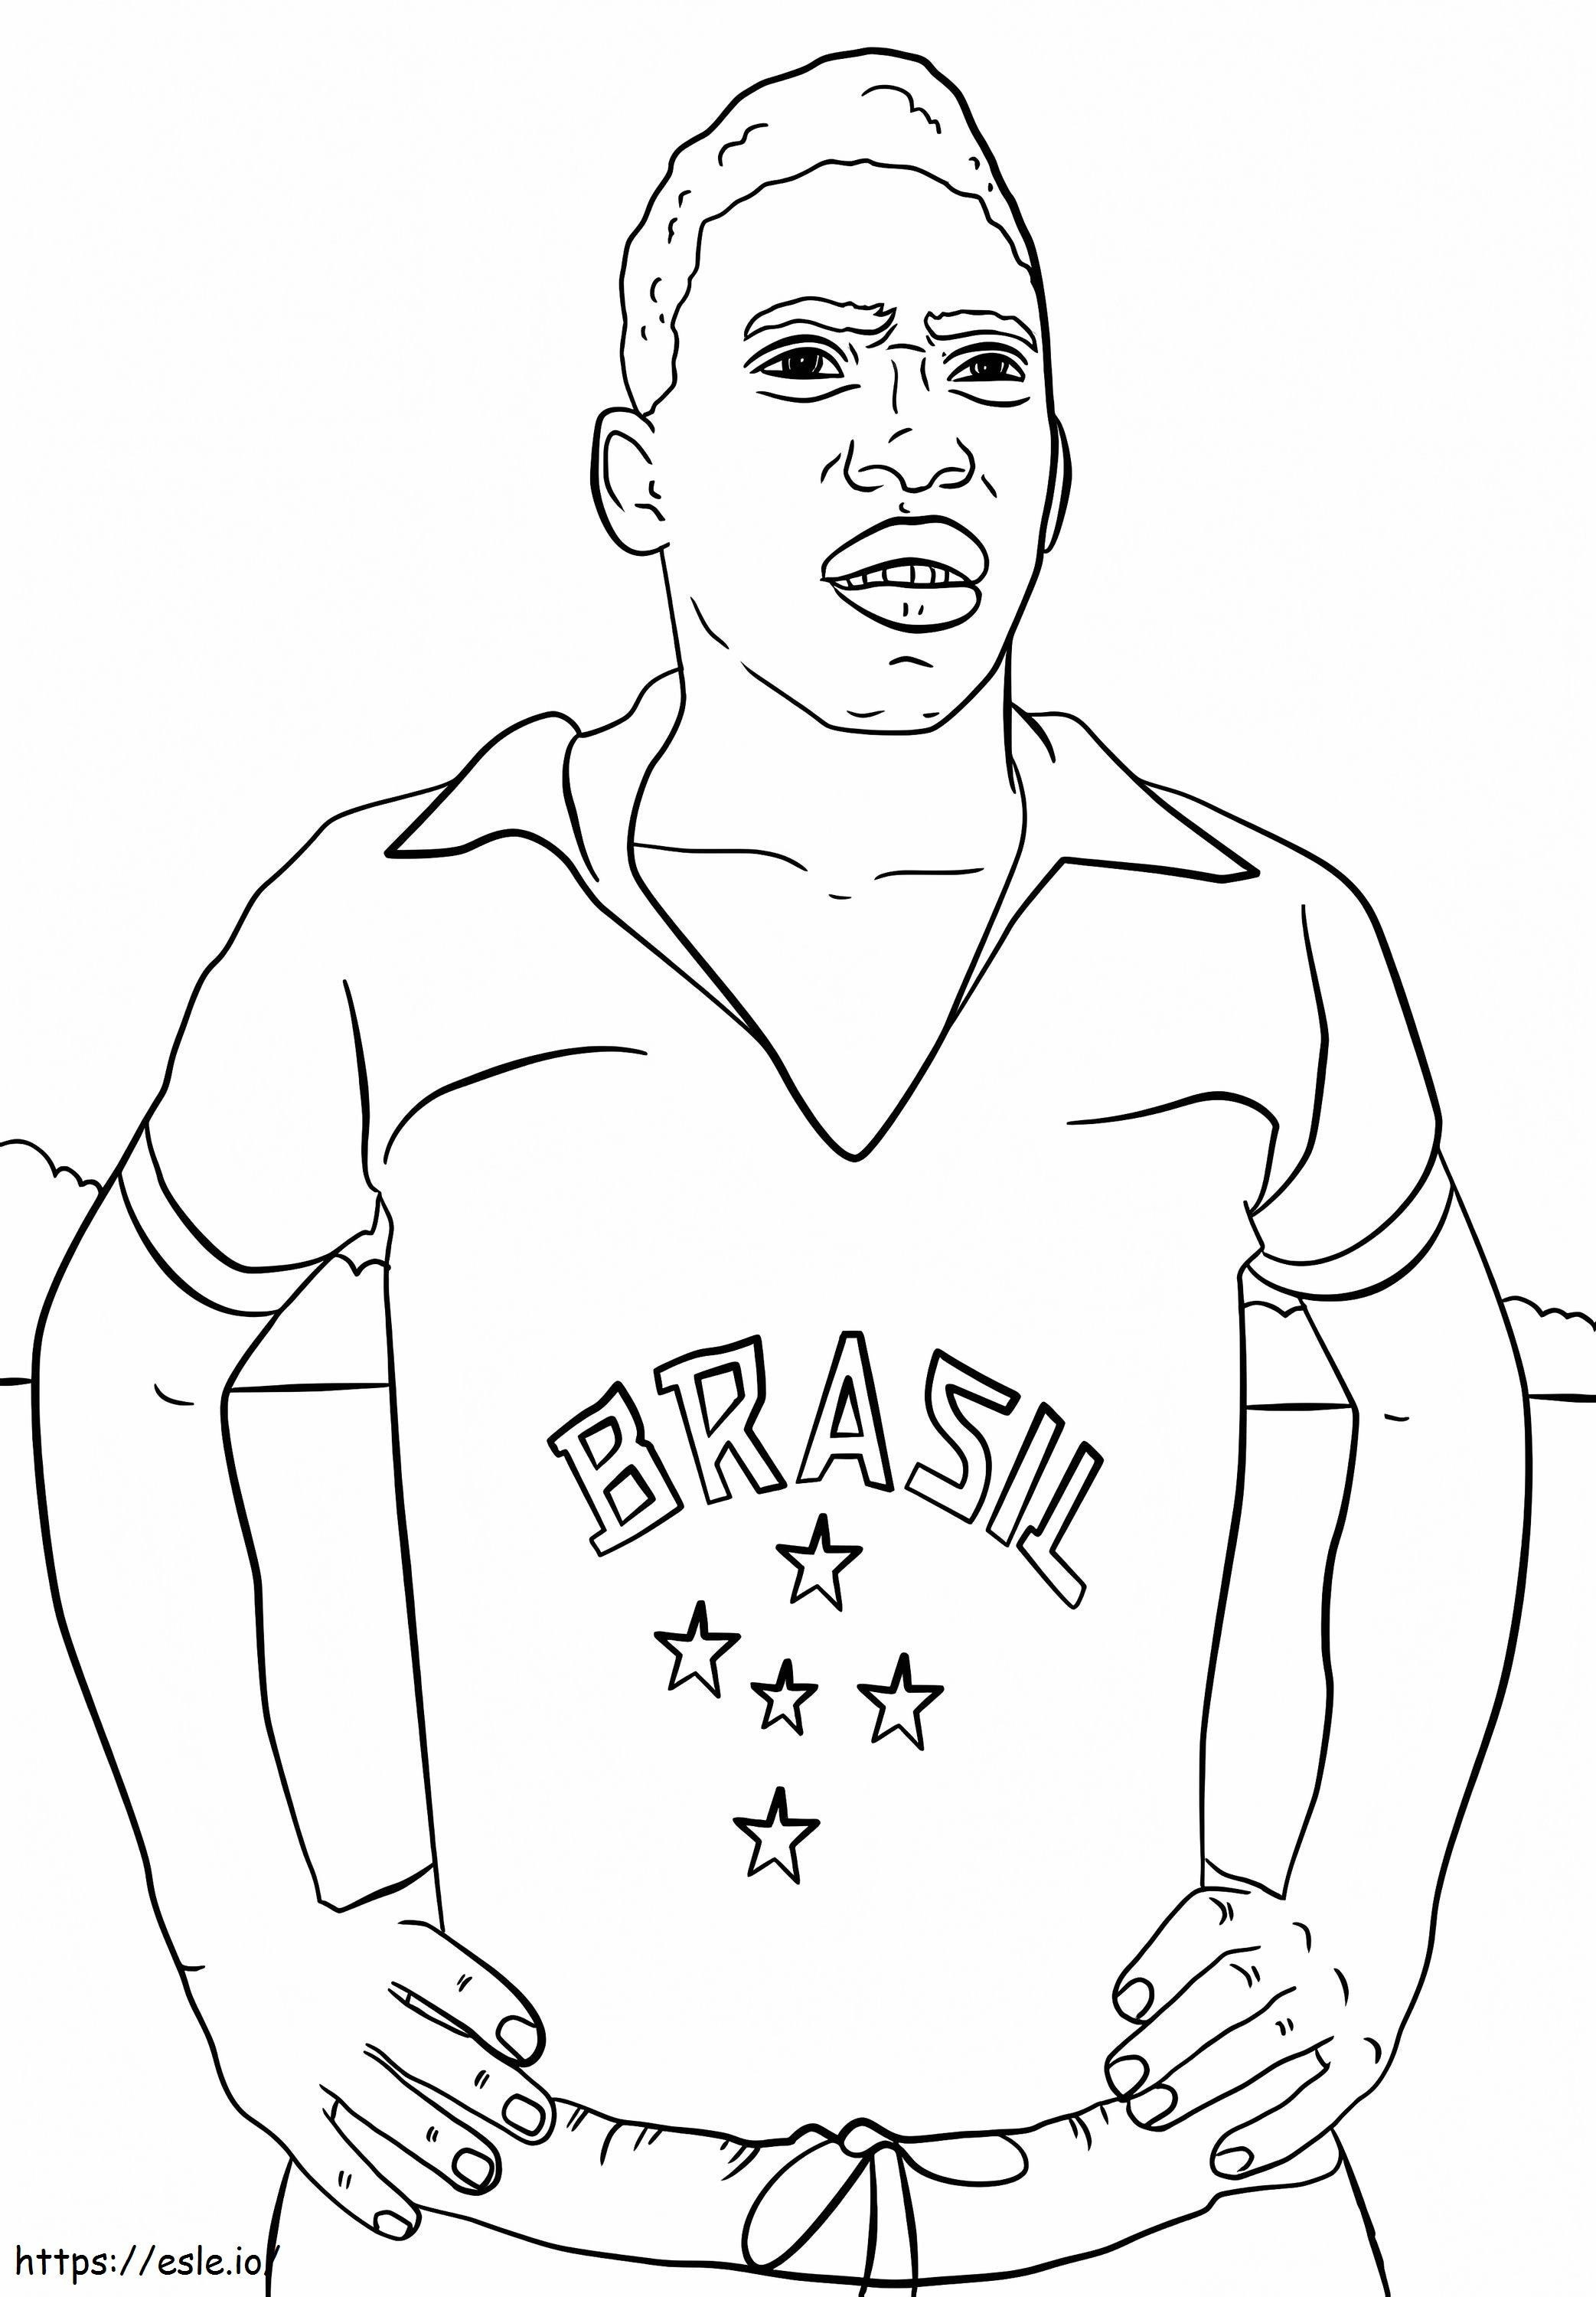 First coloring page